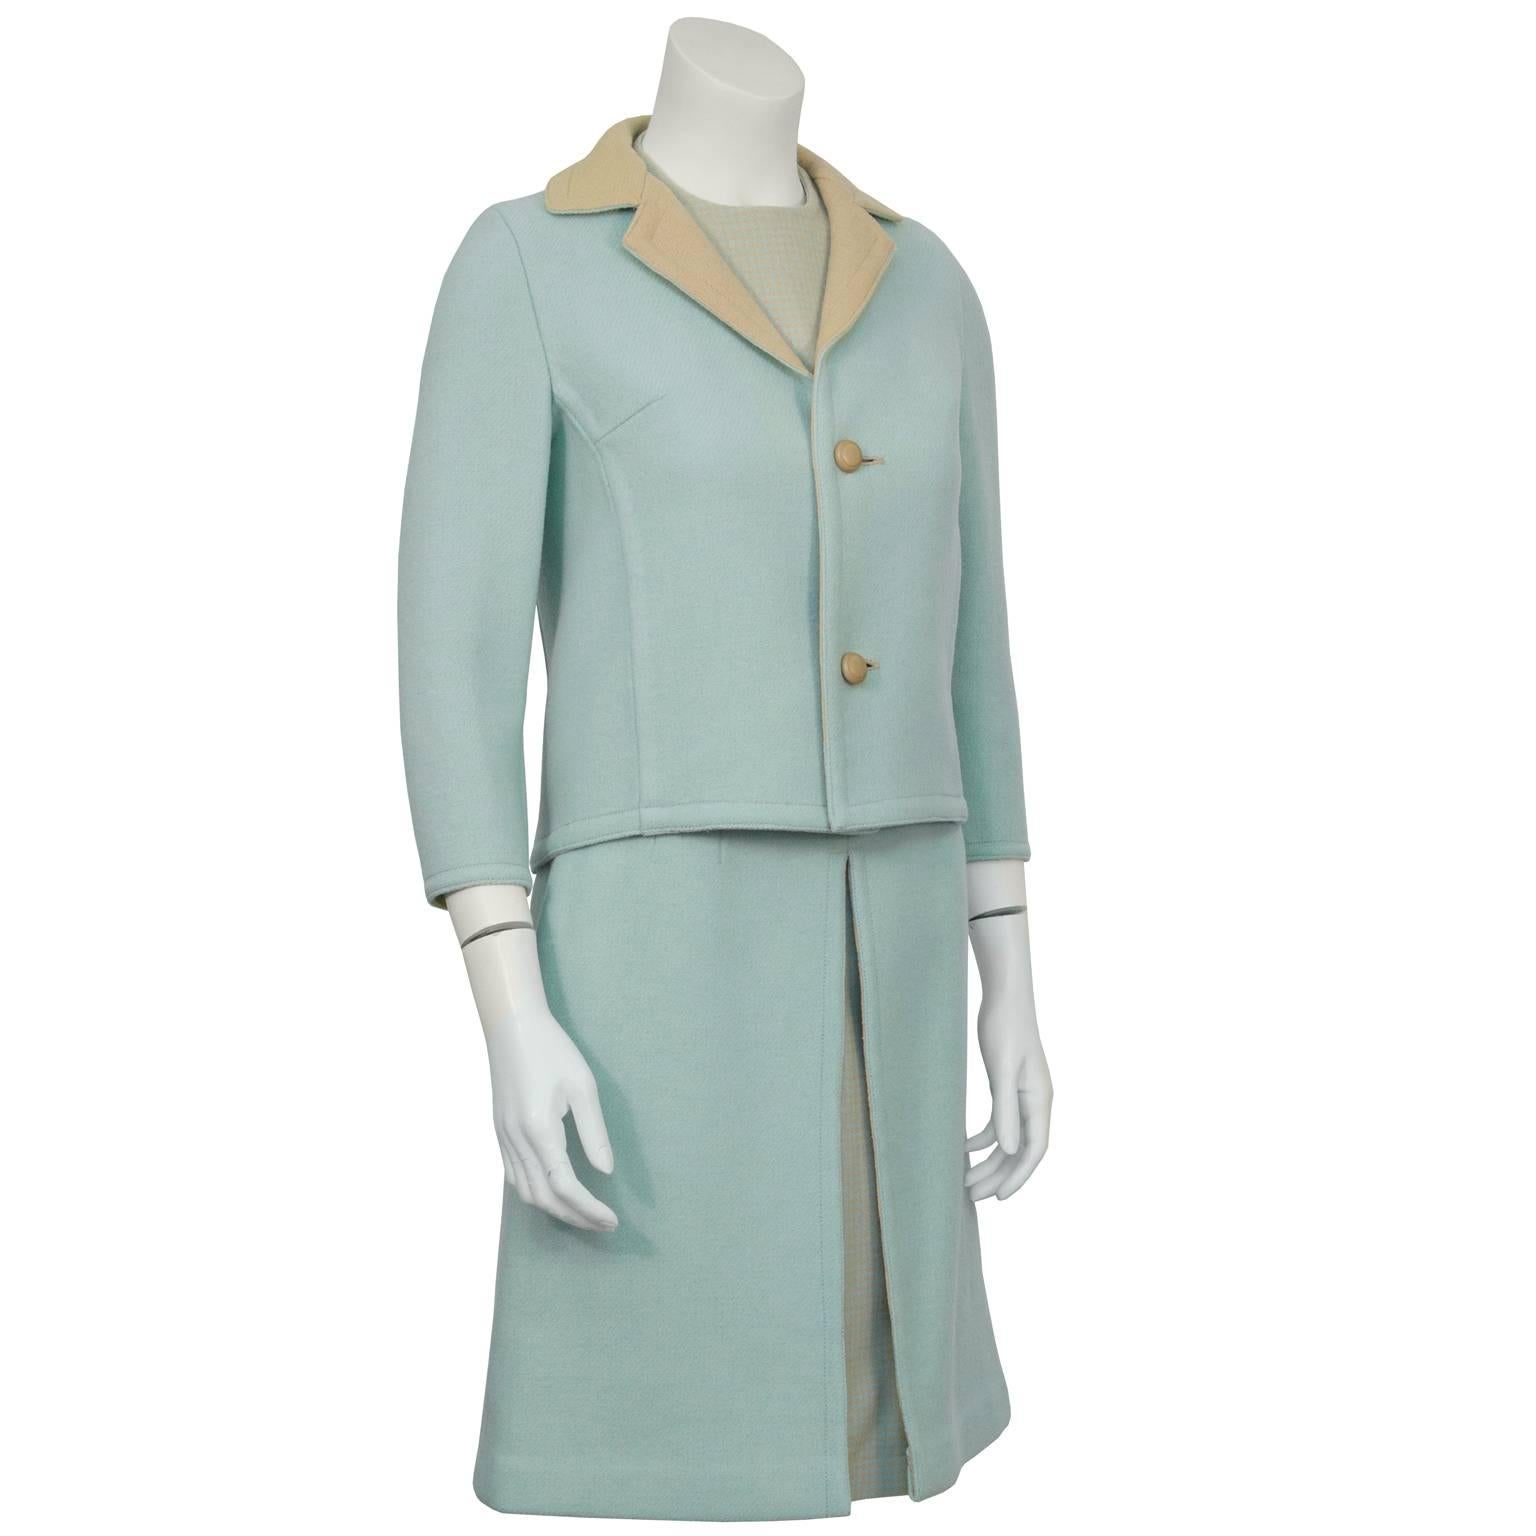 Adorable powder blue and beige double faced wool 3 piece French skirt suit from the 1960's. The jacket is light blue with a beige notched lapel, two round buttons down the front and bracelet length sleeves. The matching shell is made of houndstooth